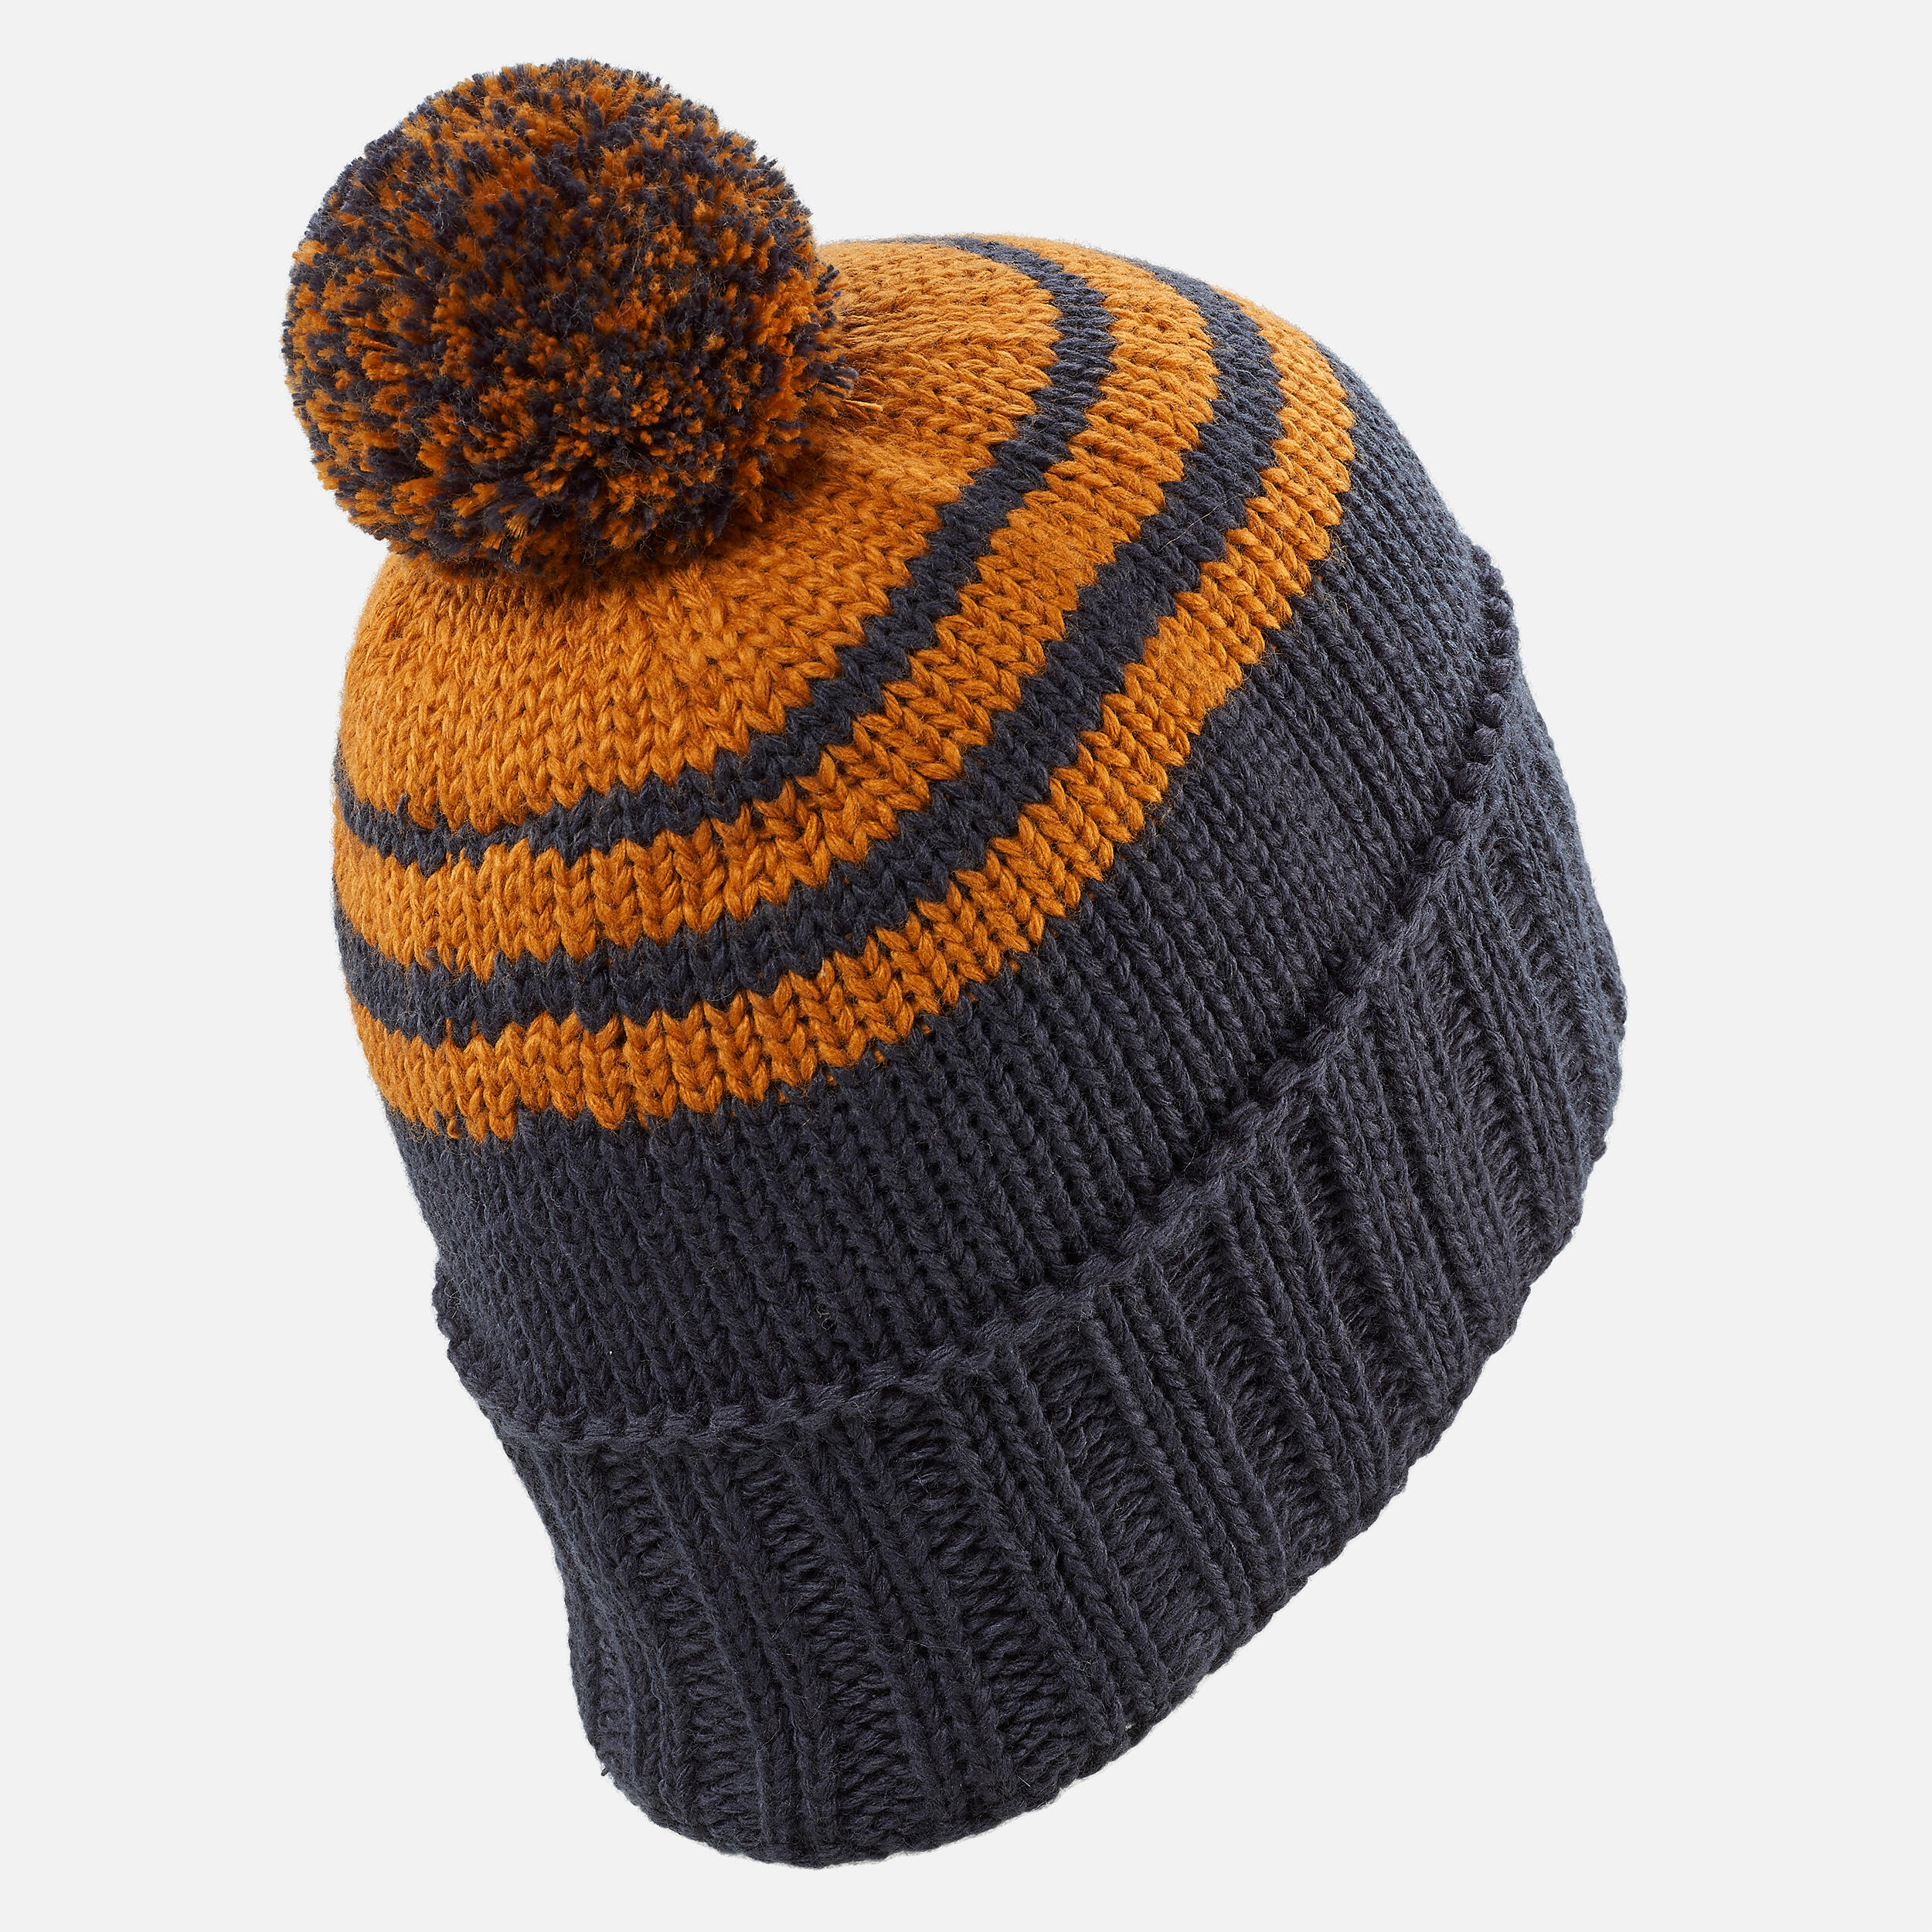 ADULT SKI HAT GRAND NORD MADE IN FRANCE - NAVY BLUE-OCHRE 7/8